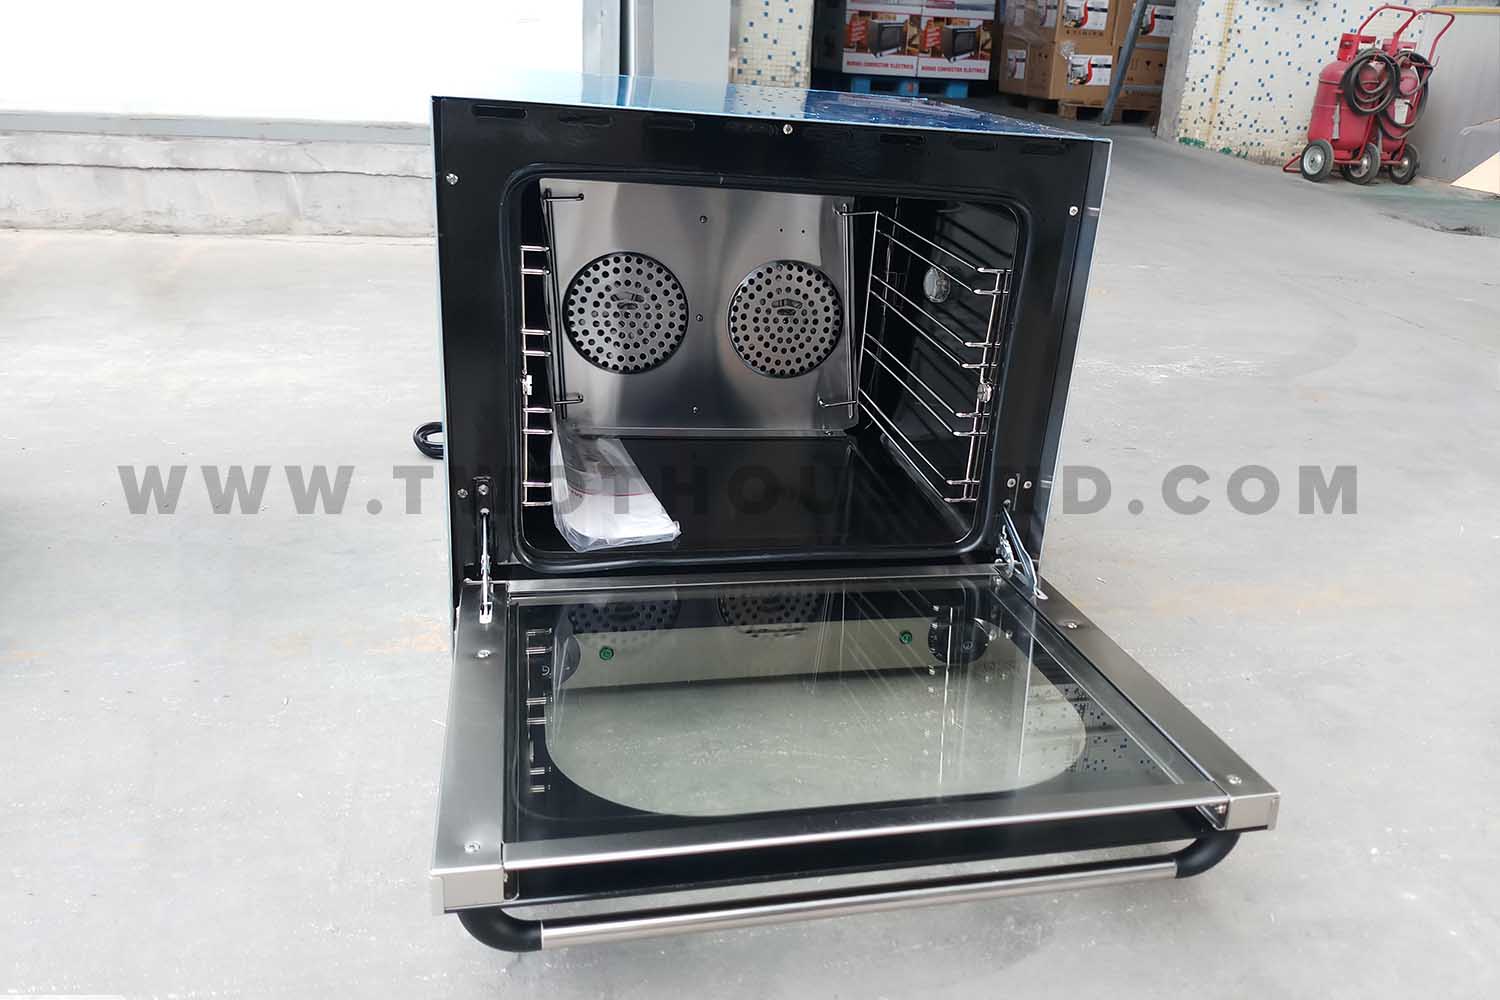 More View of Electric Convection Oven